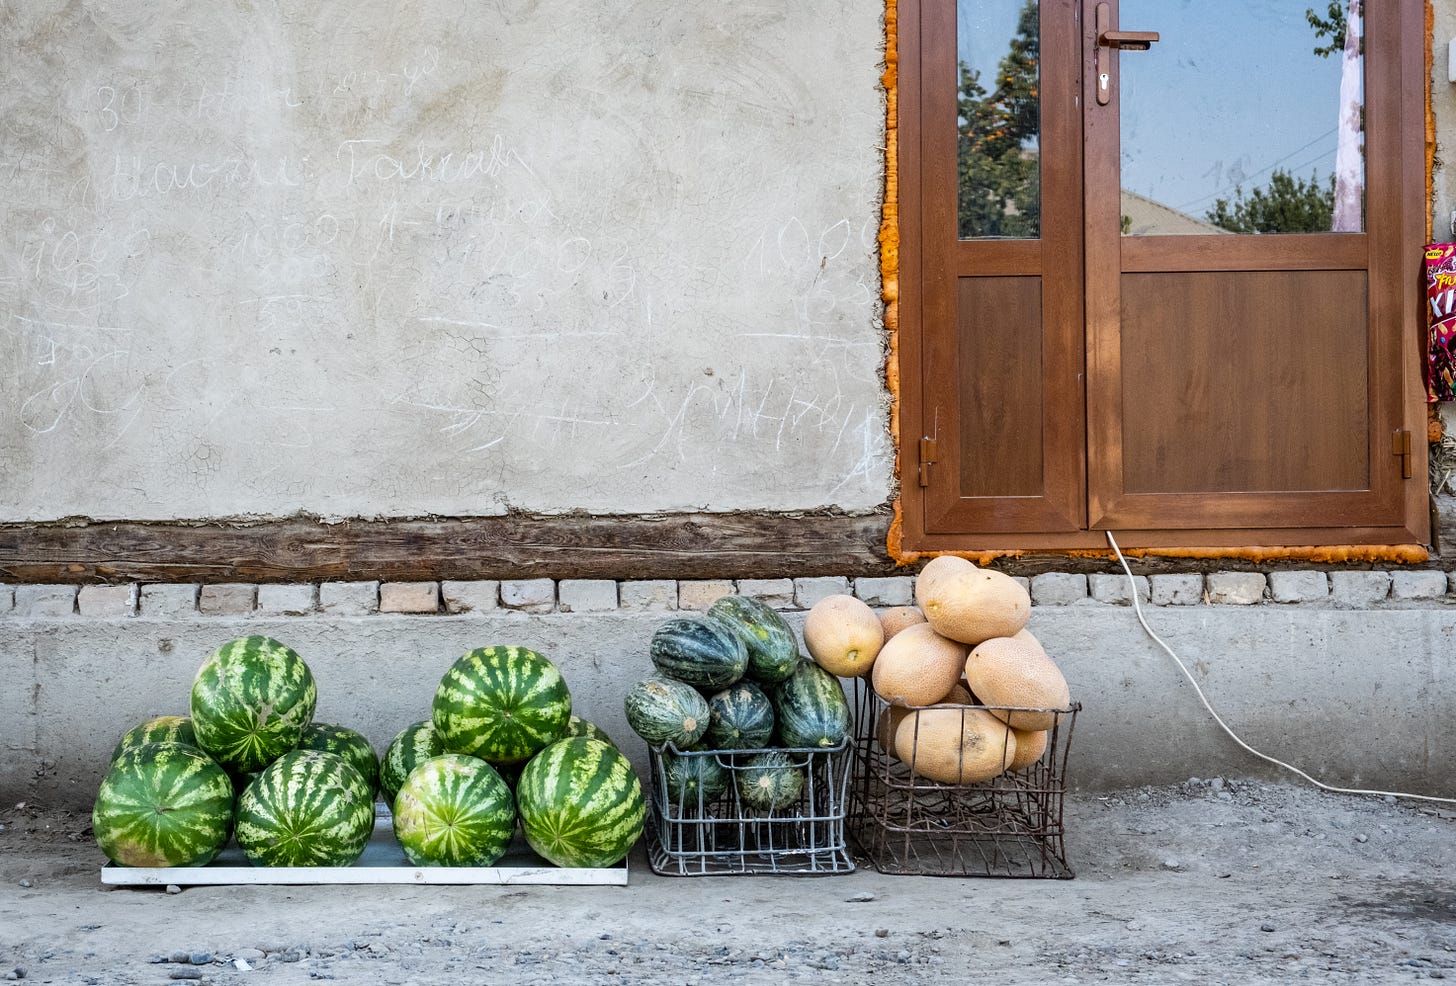 A display of watermelon sits next to two other types of melons in wire crates.